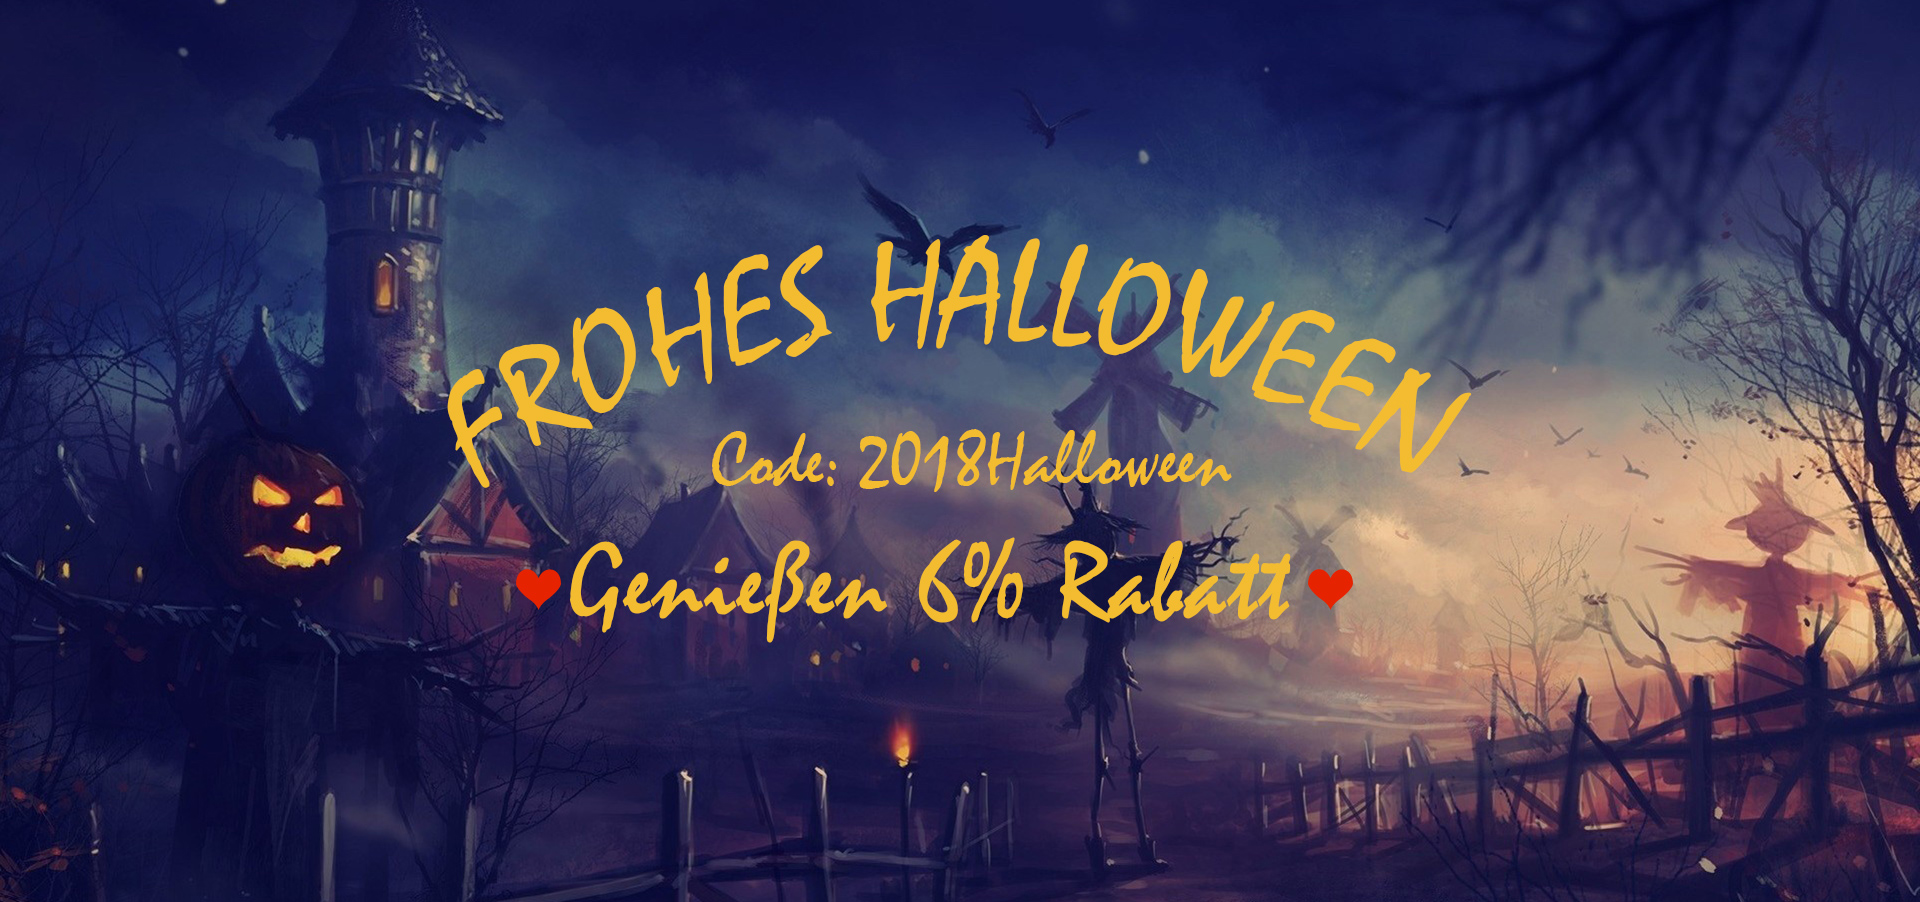 
Frohes Halloween